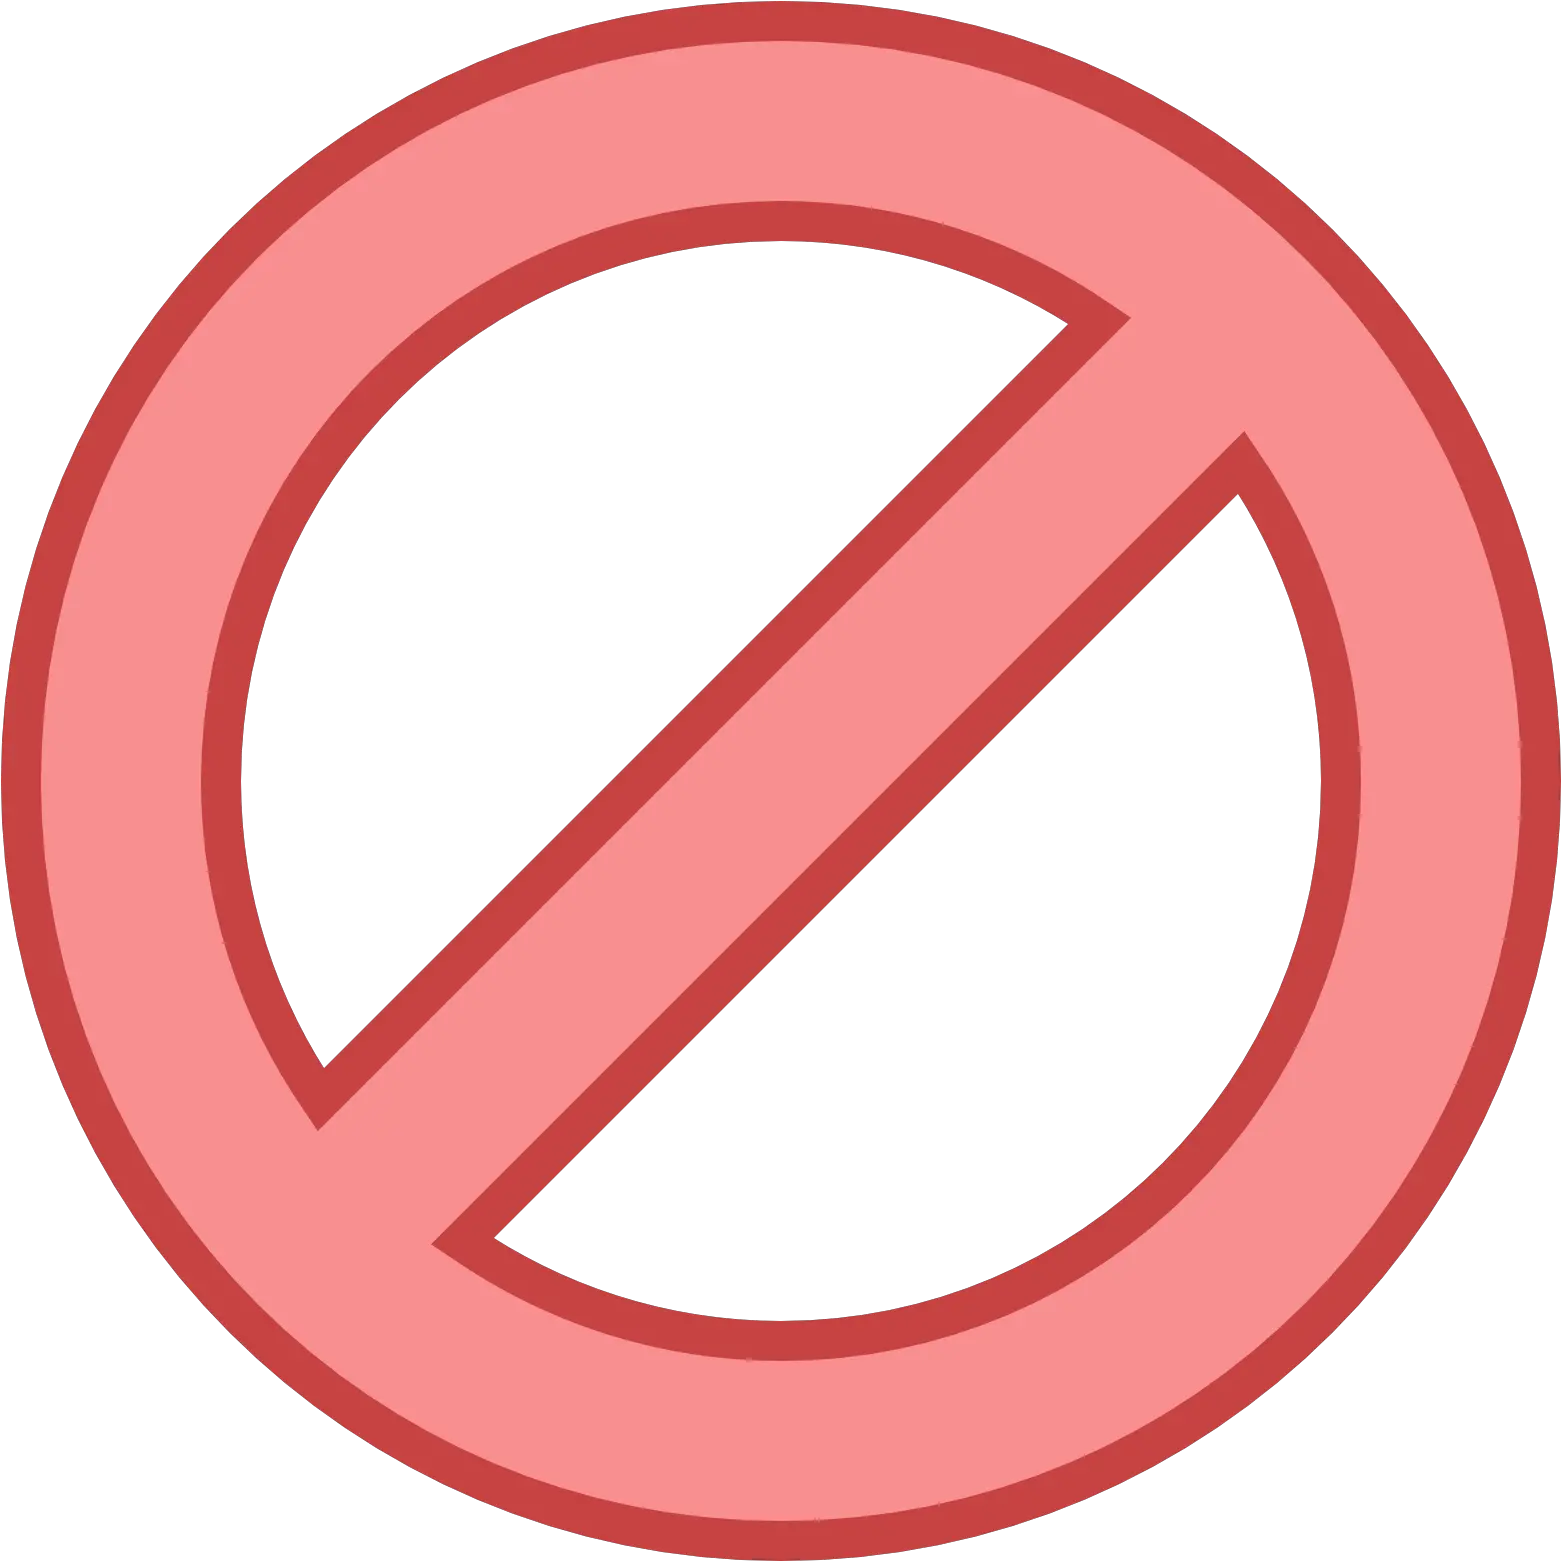 Circle With Slash Png Images In Cancel Sign